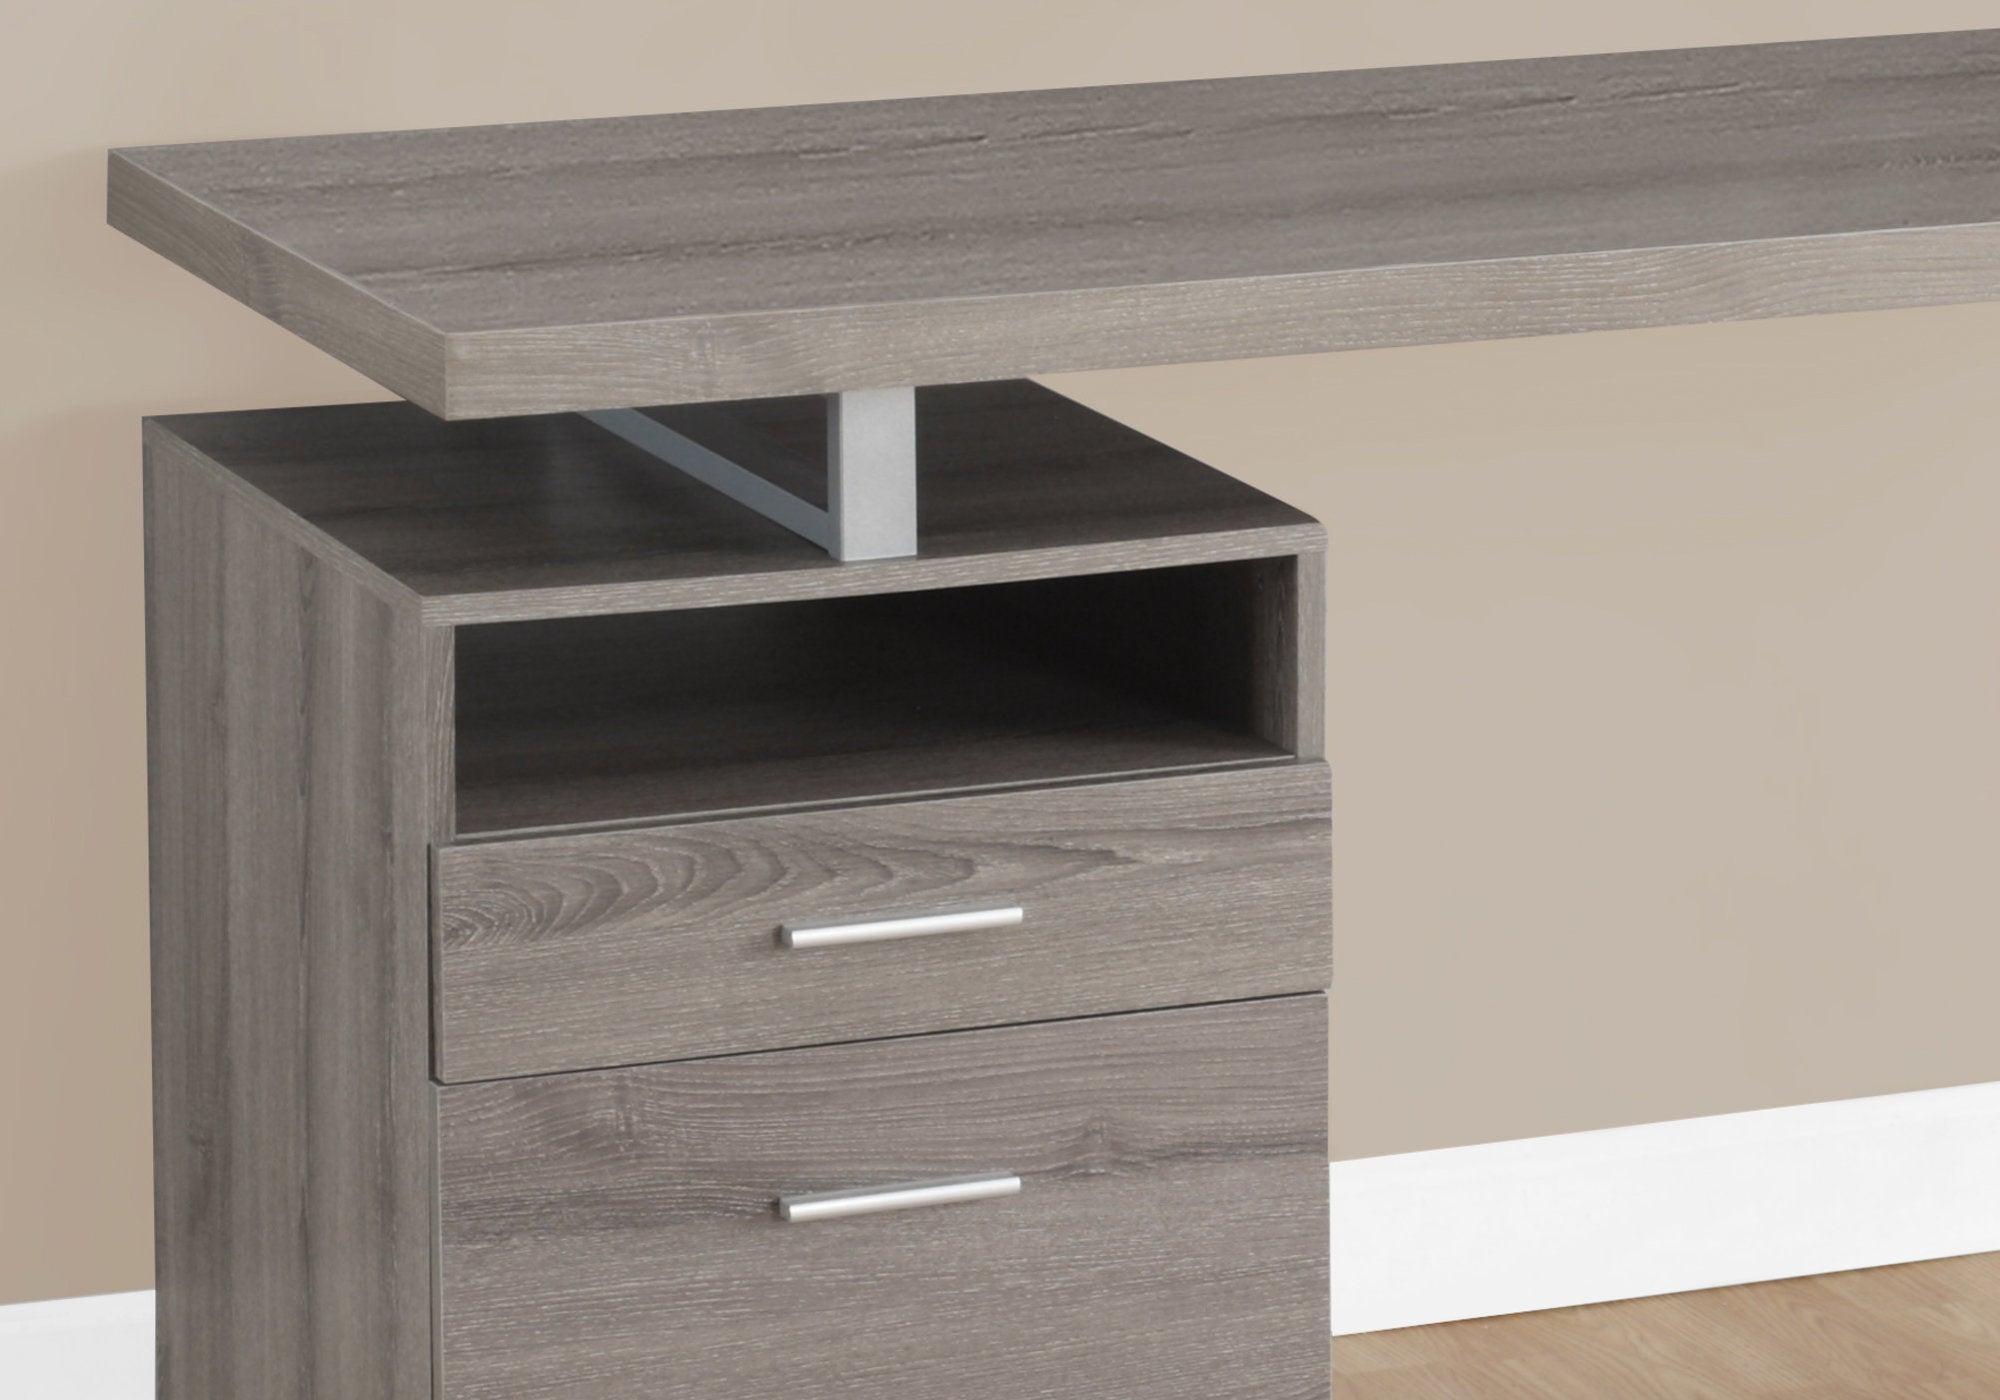 MN-207145    Computer Desk, Home Office, Laptop, Left, Right Set-Up, Storage Drawers, 60"L, Metal, Laminate, Dark Taupe, Silver, Contemporary, Modern